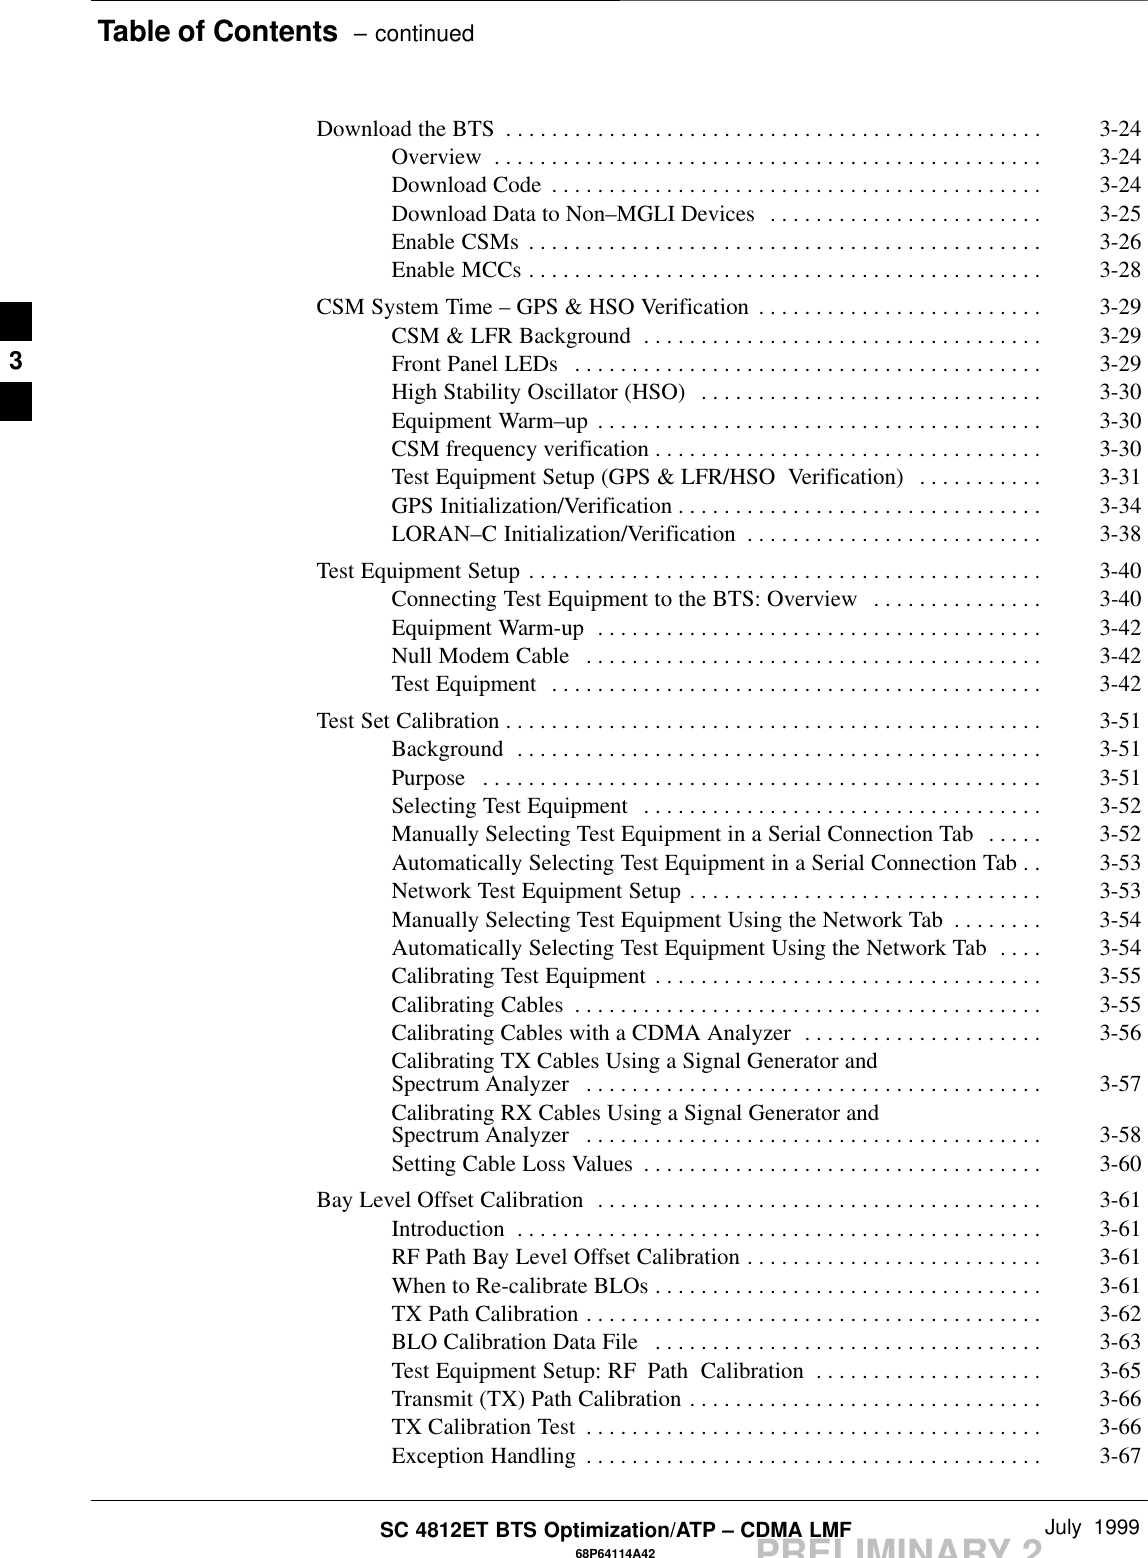 Table of Contents  – continuedPRELIMINARY 2SC 4812ET BTS Optimization/ATP – CDMA LMF July  199968P64114A42Download the BTS 3-24. . . . . . . . . . . . . . . . . . . . . . . . . . . . . . . . . . . . . . . . . . . . . . . Overview 3-24. . . . . . . . . . . . . . . . . . . . . . . . . . . . . . . . . . . . . . . . . . . . . . . . Download Code 3-24. . . . . . . . . . . . . . . . . . . . . . . . . . . . . . . . . . . . . . . . . . . Download Data to Non–MGLI Devices 3-25. . . . . . . . . . . . . . . . . . . . . . . . Enable CSMs 3-26. . . . . . . . . . . . . . . . . . . . . . . . . . . . . . . . . . . . . . . . . . . . . Enable MCCs 3-28. . . . . . . . . . . . . . . . . . . . . . . . . . . . . . . . . . . . . . . . . . . . . CSM System Time – GPS &amp; HSO Verification 3-29. . . . . . . . . . . . . . . . . . . . . . . . . CSM &amp; LFR Background 3-29. . . . . . . . . . . . . . . . . . . . . . . . . . . . . . . . . . . Front Panel LEDs 3-29. . . . . . . . . . . . . . . . . . . . . . . . . . . . . . . . . . . . . . . . . High Stability Oscillator (HSO) 3-30. . . . . . . . . . . . . . . . . . . . . . . . . . . . . . Equipment Warm–up 3-30. . . . . . . . . . . . . . . . . . . . . . . . . . . . . . . . . . . . . . . CSM frequency verification 3-30. . . . . . . . . . . . . . . . . . . . . . . . . . . . . . . . . . Test Equipment Setup (GPS &amp; LFR/HSO  Verification) 3-31. . . . . . . . . . . GPS Initialization/Verification 3-34. . . . . . . . . . . . . . . . . . . . . . . . . . . . . . . . LORAN–C Initialization/Verification 3-38. . . . . . . . . . . . . . . . . . . . . . . . . . Test Equipment Setup 3-40. . . . . . . . . . . . . . . . . . . . . . . . . . . . . . . . . . . . . . . . . . . . . Connecting Test Equipment to the BTS: Overview 3-40. . . . . . . . . . . . . . . Equipment Warm-up 3-42. . . . . . . . . . . . . . . . . . . . . . . . . . . . . . . . . . . . . . . Null Modem Cable 3-42. . . . . . . . . . . . . . . . . . . . . . . . . . . . . . . . . . . . . . . . Test Equipment 3-42. . . . . . . . . . . . . . . . . . . . . . . . . . . . . . . . . . . . . . . . . . . Test Set Calibration 3-51. . . . . . . . . . . . . . . . . . . . . . . . . . . . . . . . . . . . . . . . . . . . . . . Background 3-51. . . . . . . . . . . . . . . . . . . . . . . . . . . . . . . . . . . . . . . . . . . . . . Purpose 3-51. . . . . . . . . . . . . . . . . . . . . . . . . . . . . . . . . . . . . . . . . . . . . . . . . Selecting Test Equipment 3-52. . . . . . . . . . . . . . . . . . . . . . . . . . . . . . . . . . . Manually Selecting Test Equipment in a Serial Connection Tab 3-52. . . . . Automatically Selecting Test Equipment in a Serial Connection Tab 3-53. . Network Test Equipment Setup 3-53. . . . . . . . . . . . . . . . . . . . . . . . . . . . . . . Manually Selecting Test Equipment Using the Network Tab 3-54. . . . . . . . Automatically Selecting Test Equipment Using the Network Tab 3-54. . . . Calibrating Test Equipment 3-55. . . . . . . . . . . . . . . . . . . . . . . . . . . . . . . . . . Calibrating Cables 3-55. . . . . . . . . . . . . . . . . . . . . . . . . . . . . . . . . . . . . . . . . Calibrating Cables with a CDMA Analyzer 3-56. . . . . . . . . . . . . . . . . . . . . Calibrating TX Cables Using a Signal Generator and Spectrum Analyzer 3-57. . . . . . . . . . . . . . . . . . . . . . . . . . . . . . . . . . . . . . . . Calibrating RX Cables Using a Signal Generator and Spectrum Analyzer 3-58. . . . . . . . . . . . . . . . . . . . . . . . . . . . . . . . . . . . . . . . Setting Cable Loss Values 3-60. . . . . . . . . . . . . . . . . . . . . . . . . . . . . . . . . . . Bay Level Offset Calibration 3-61. . . . . . . . . . . . . . . . . . . . . . . . . . . . . . . . . . . . . . . Introduction 3-61. . . . . . . . . . . . . . . . . . . . . . . . . . . . . . . . . . . . . . . . . . . . . . RF Path Bay Level Offset Calibration 3-61. . . . . . . . . . . . . . . . . . . . . . . . . . When to Re-calibrate BLOs 3-61. . . . . . . . . . . . . . . . . . . . . . . . . . . . . . . . . . TX Path Calibration 3-62. . . . . . . . . . . . . . . . . . . . . . . . . . . . . . . . . . . . . . . . BLO Calibration Data File 3-63. . . . . . . . . . . . . . . . . . . . . . . . . . . . . . . . . . Test Equipment Setup: RF Path  Calibration 3-65. . . . . . . . . . . . . . . . . . . . Transmit (TX) Path Calibration 3-66. . . . . . . . . . . . . . . . . . . . . . . . . . . . . . . TX Calibration Test 3-66. . . . . . . . . . . . . . . . . . . . . . . . . . . . . . . . . . . . . . . . Exception Handling 3-67. . . . . . . . . . . . . . . . . . . . . . . . . . . . . . . . . . . . . . . . 3